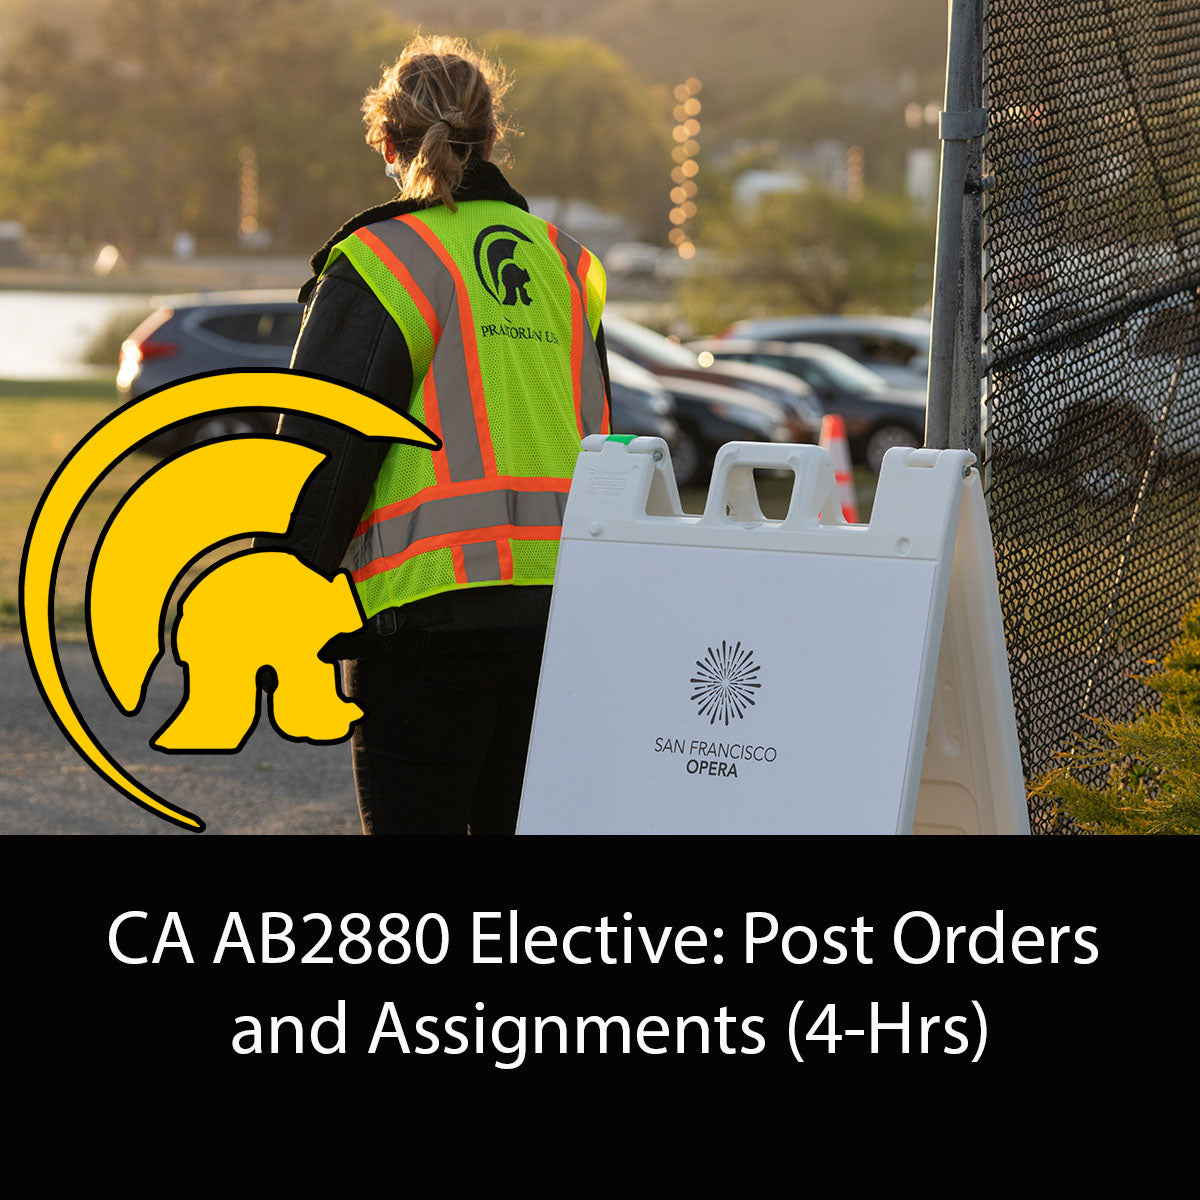 CA AB2880 Elective: Post Orders and Assignments (4-Hrs)